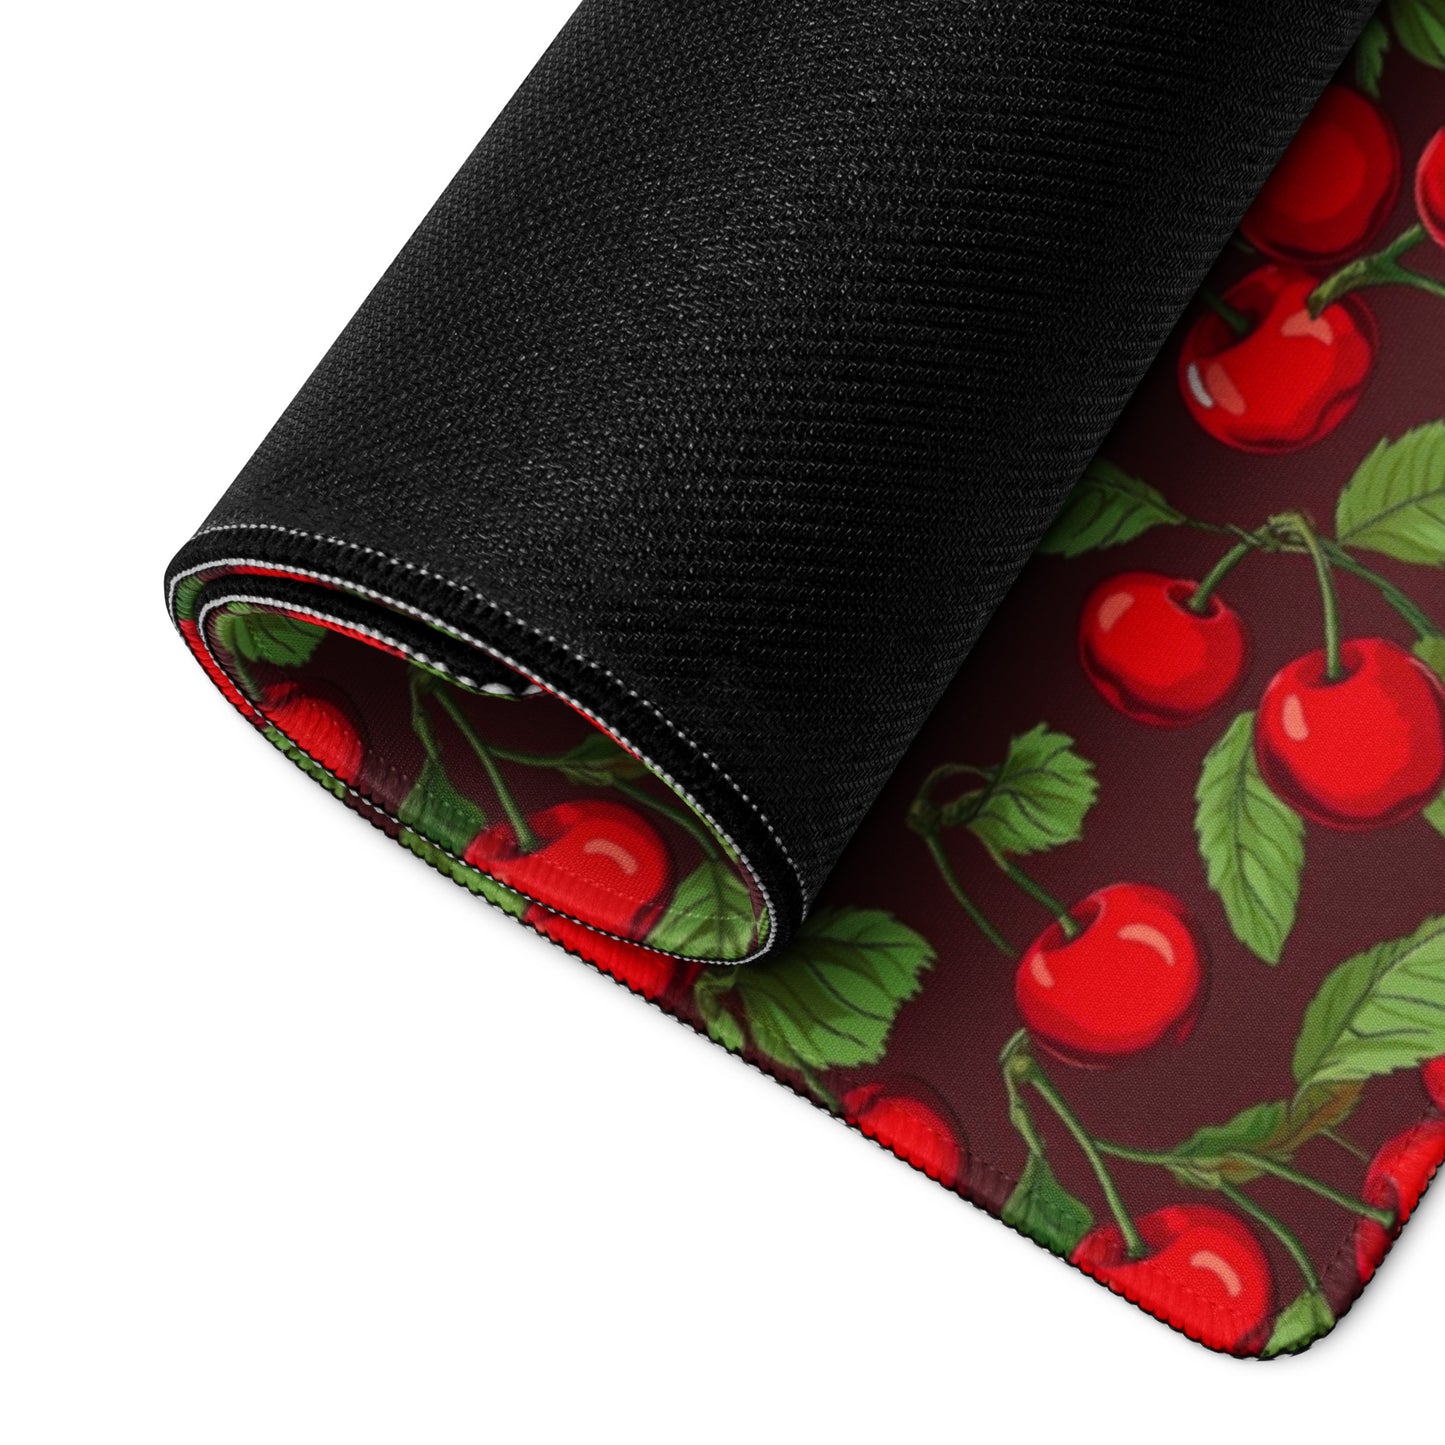 A 36" x 18" desk pad with cherries all over it rolled up. Red in color.A 36" x 18" desk pad with cherries all over it rolled up. Red in color.